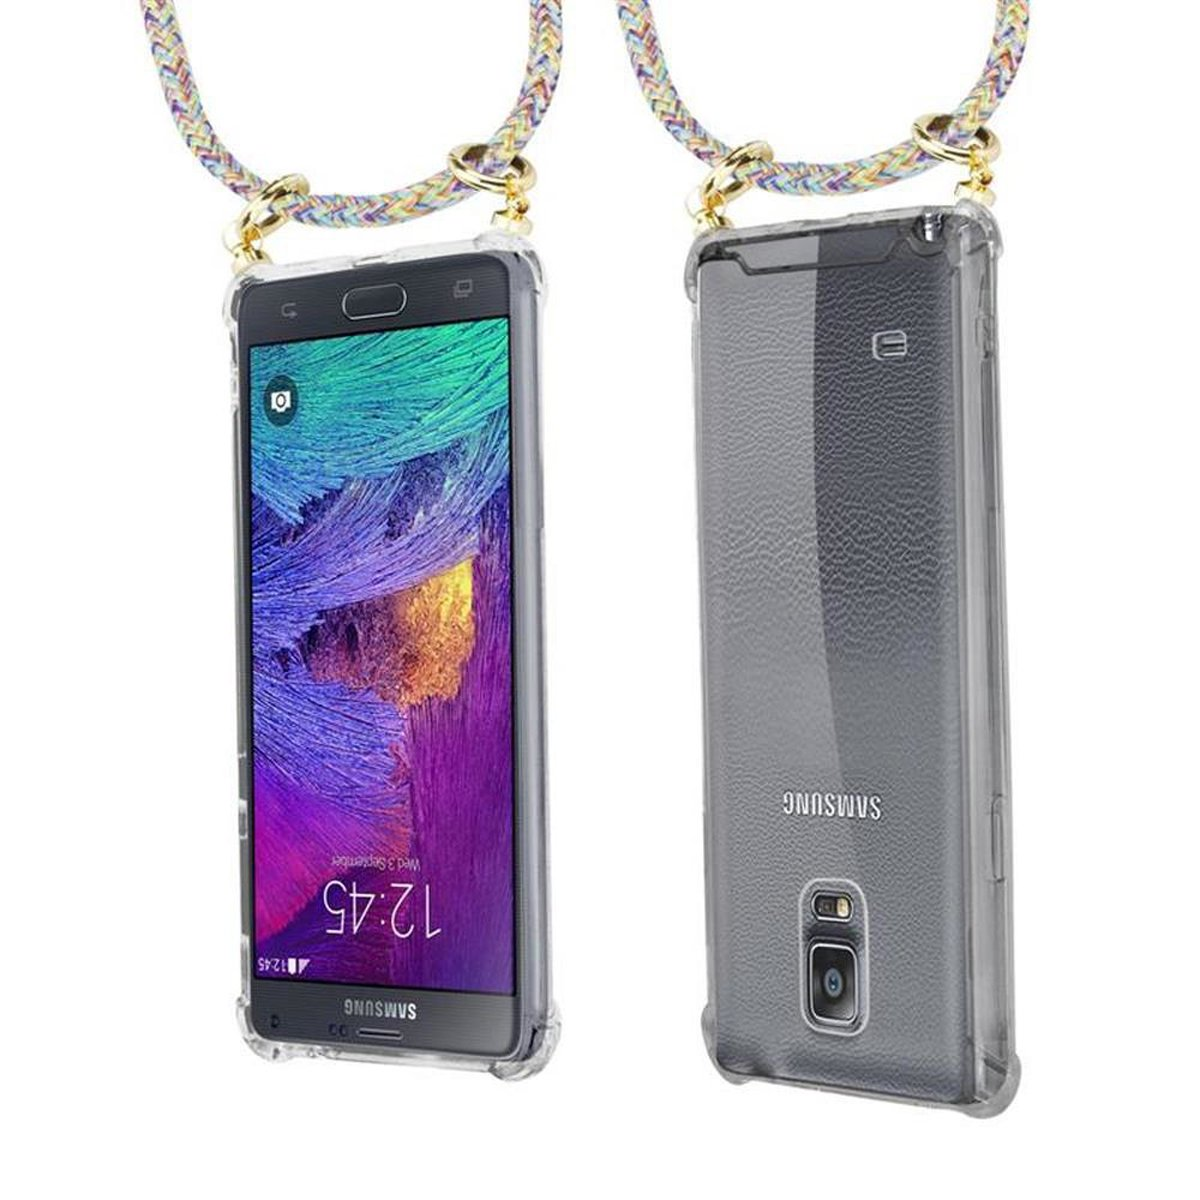 Kordel Gold mit RAINBOW NOTE Band Galaxy abnehmbarer CADORABO und Backcover, Samsung, Kette Handy Hülle, Ringen, 4,